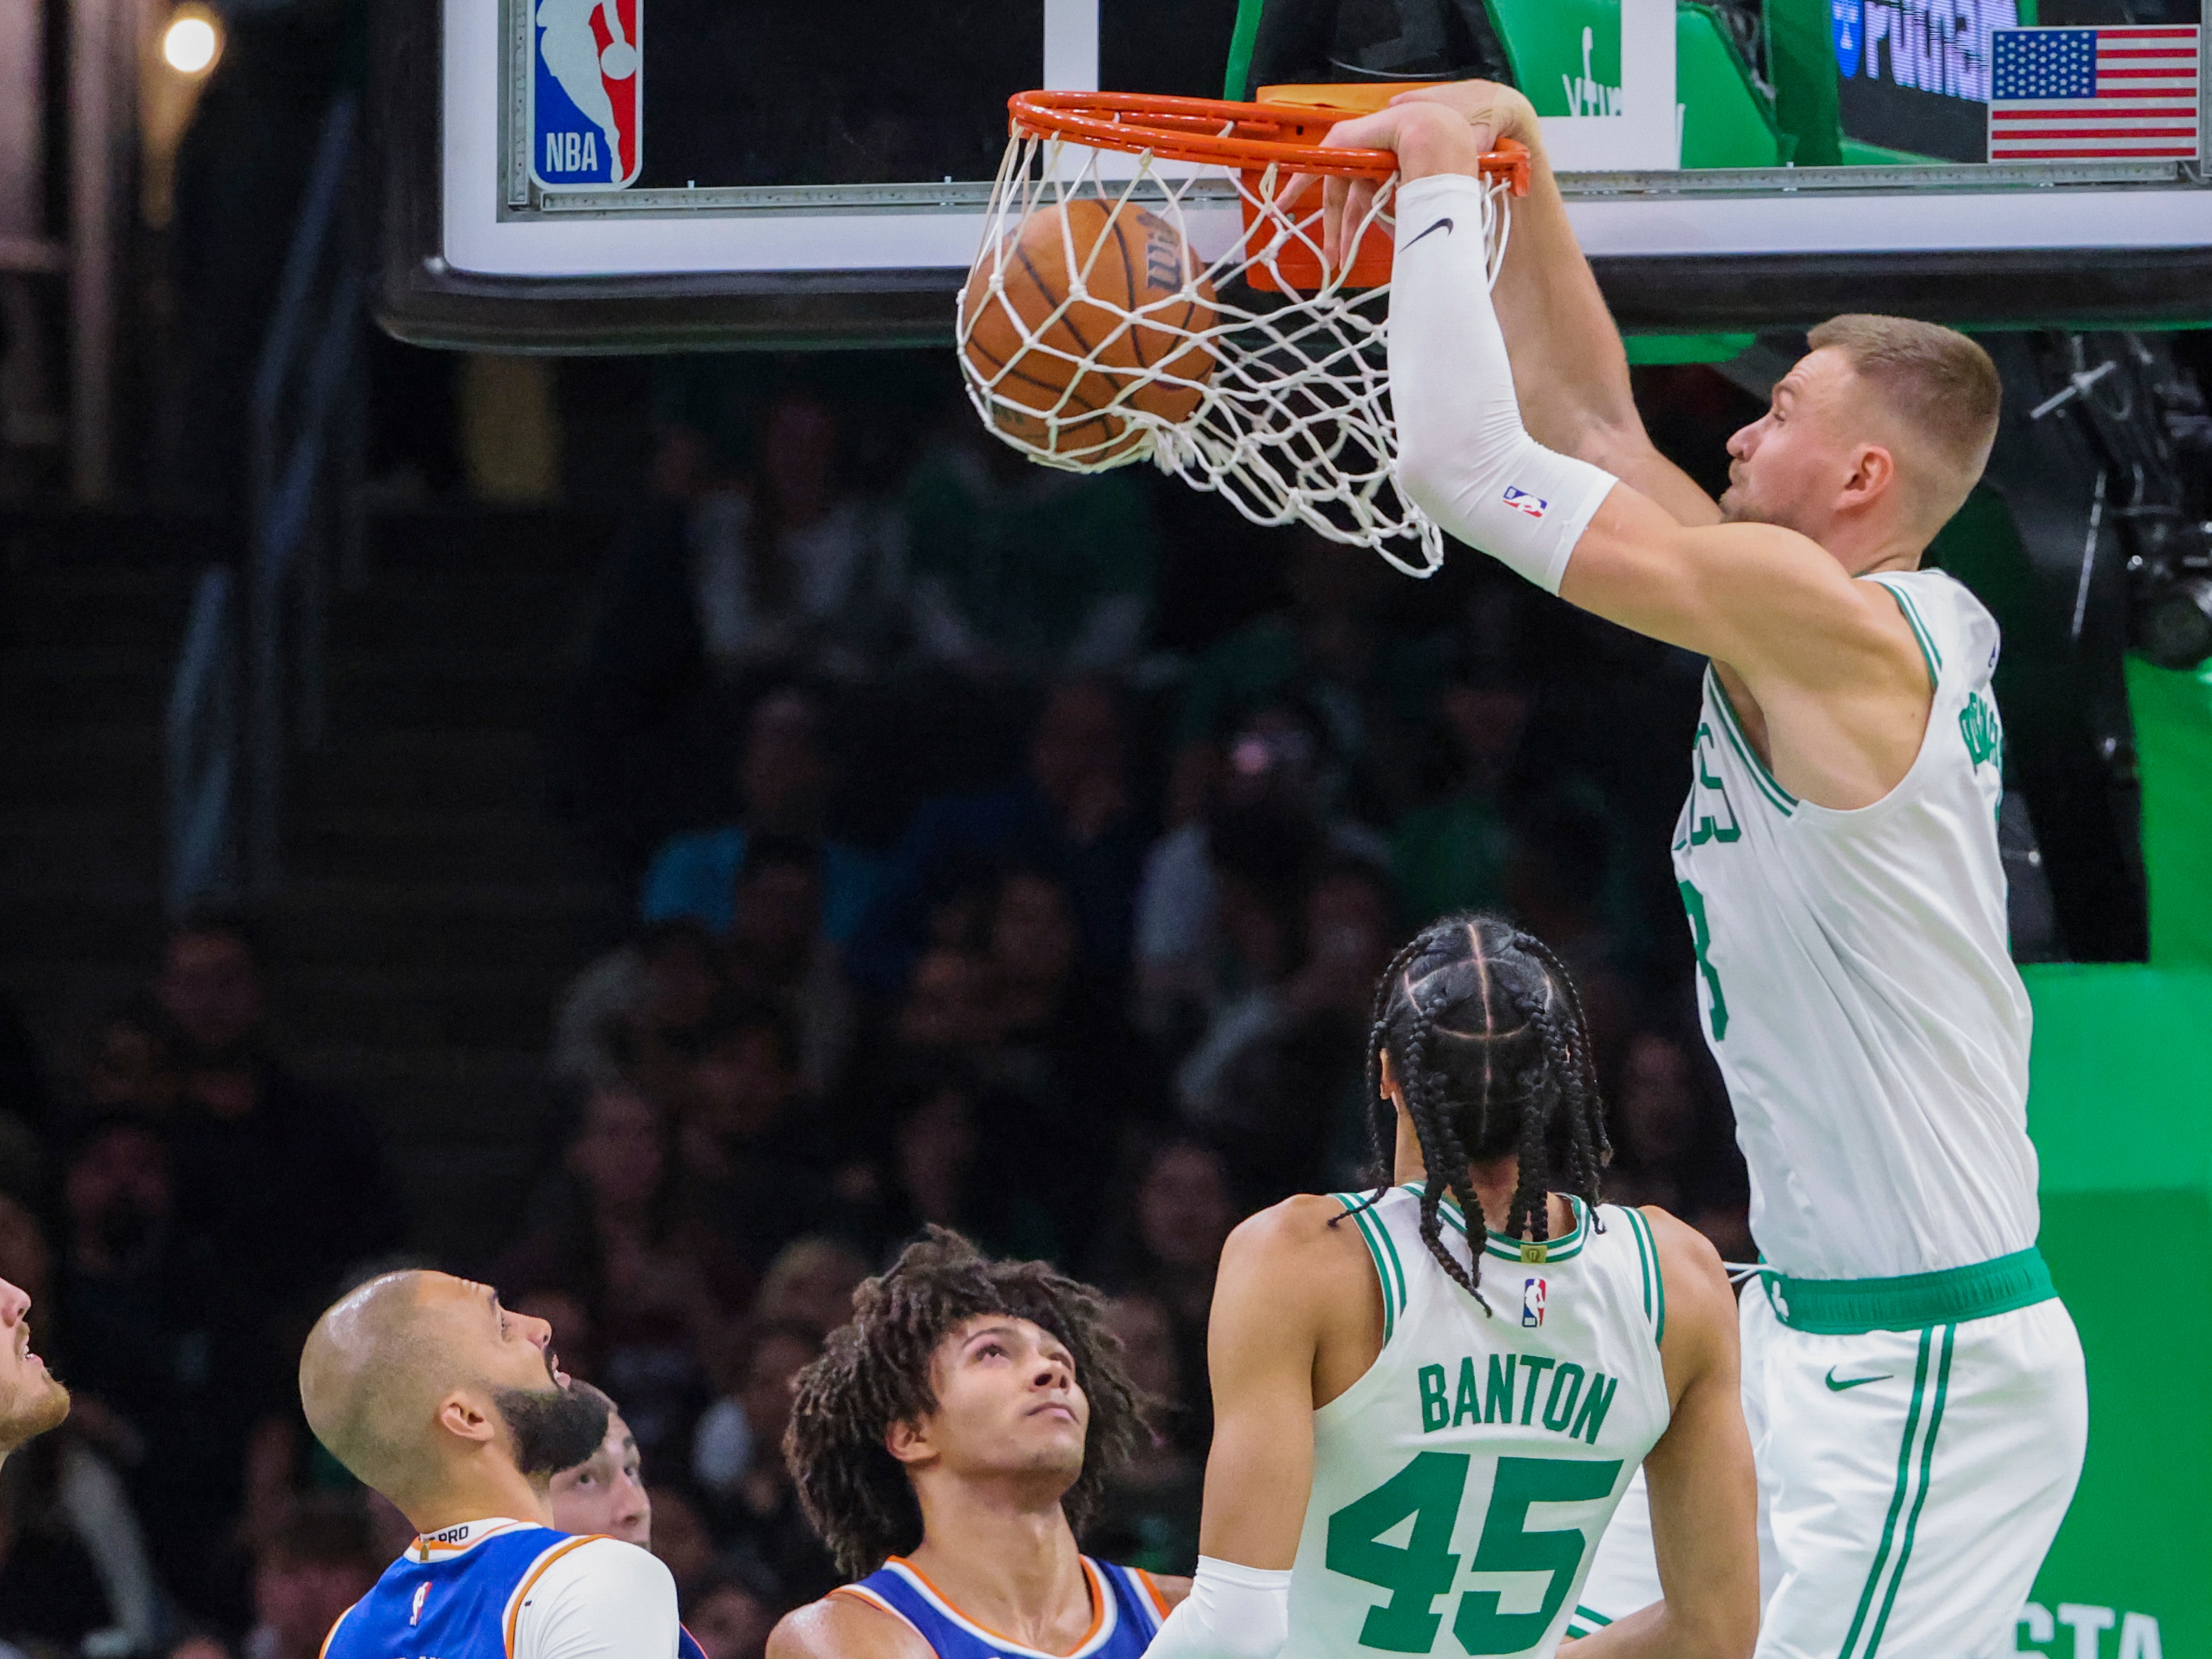 With some help from the Garden crowd, the Celtics rebounded in Game 3 —  just as they have all postseason - The Boston Globe